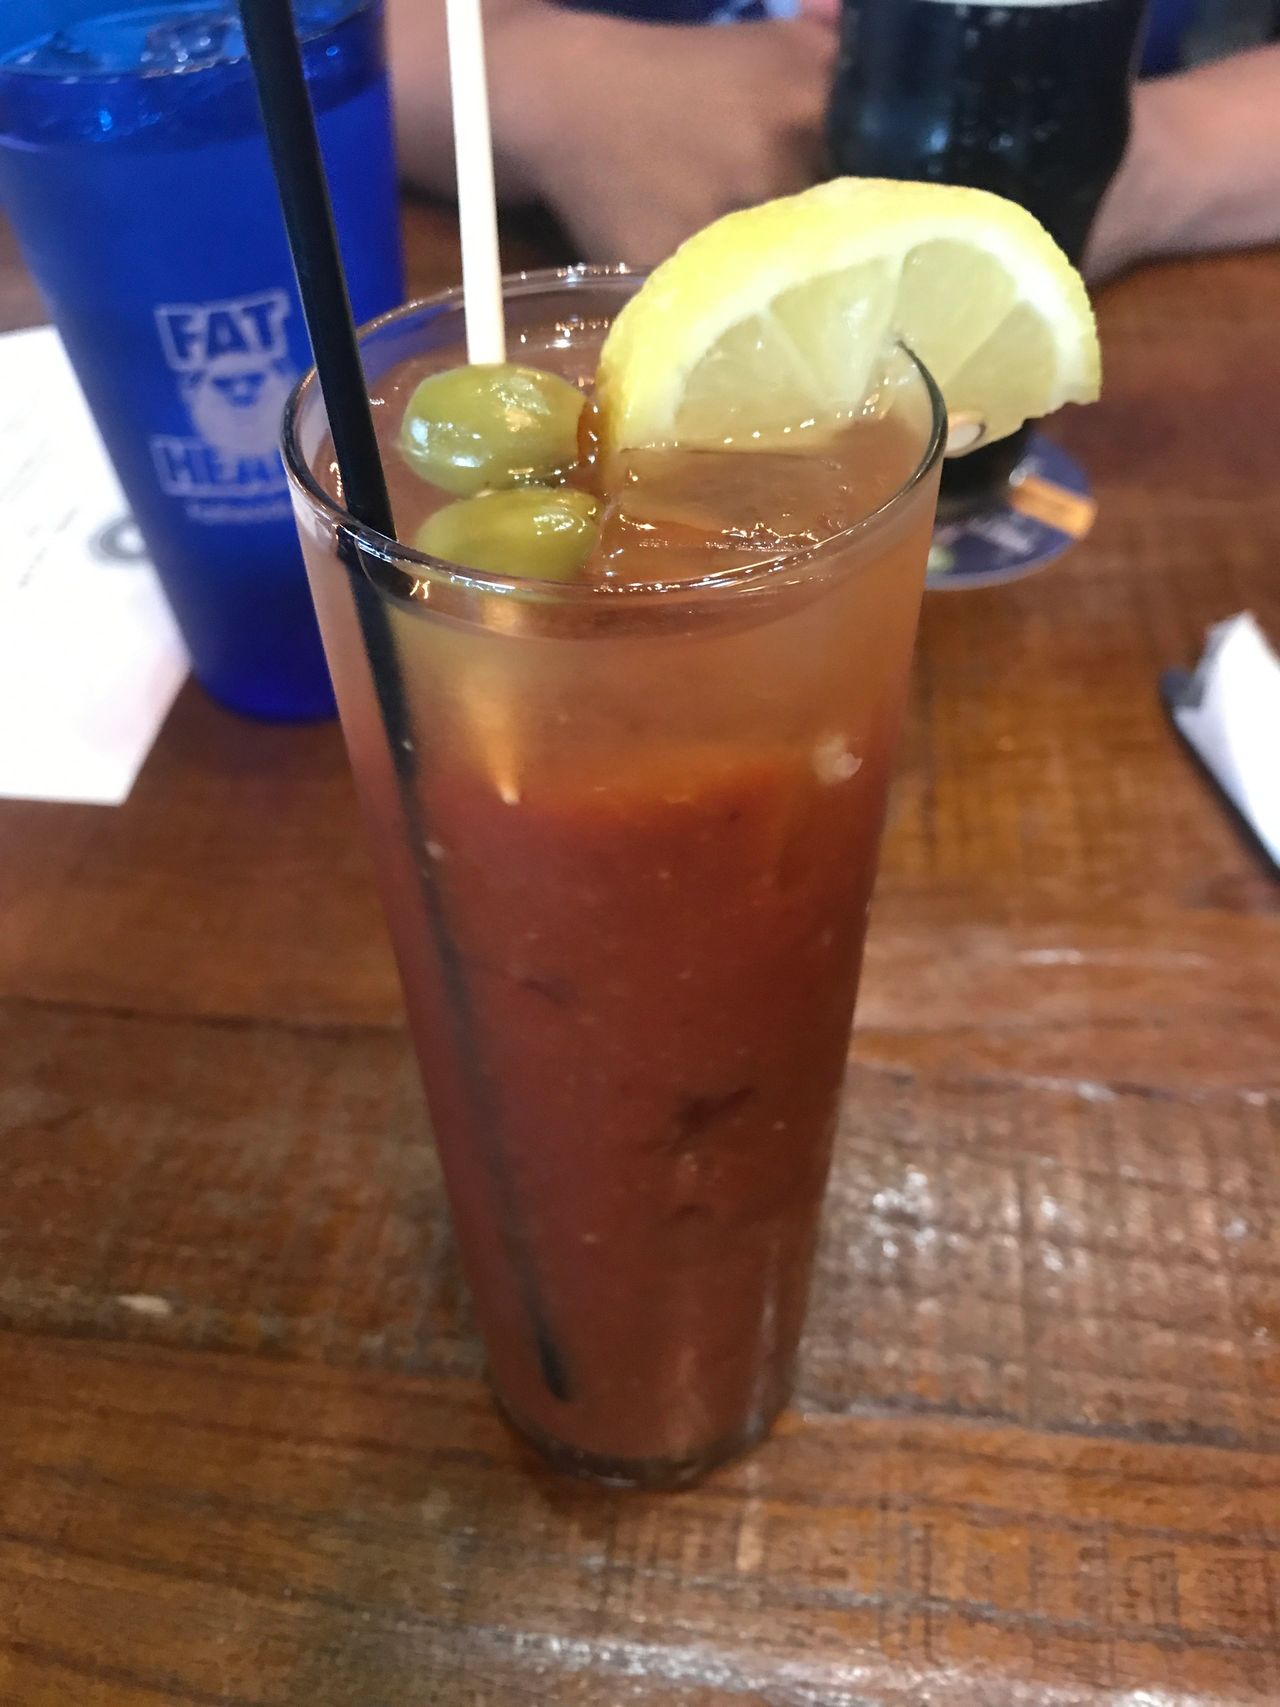 The bloody mary at Fat Head's Brewery